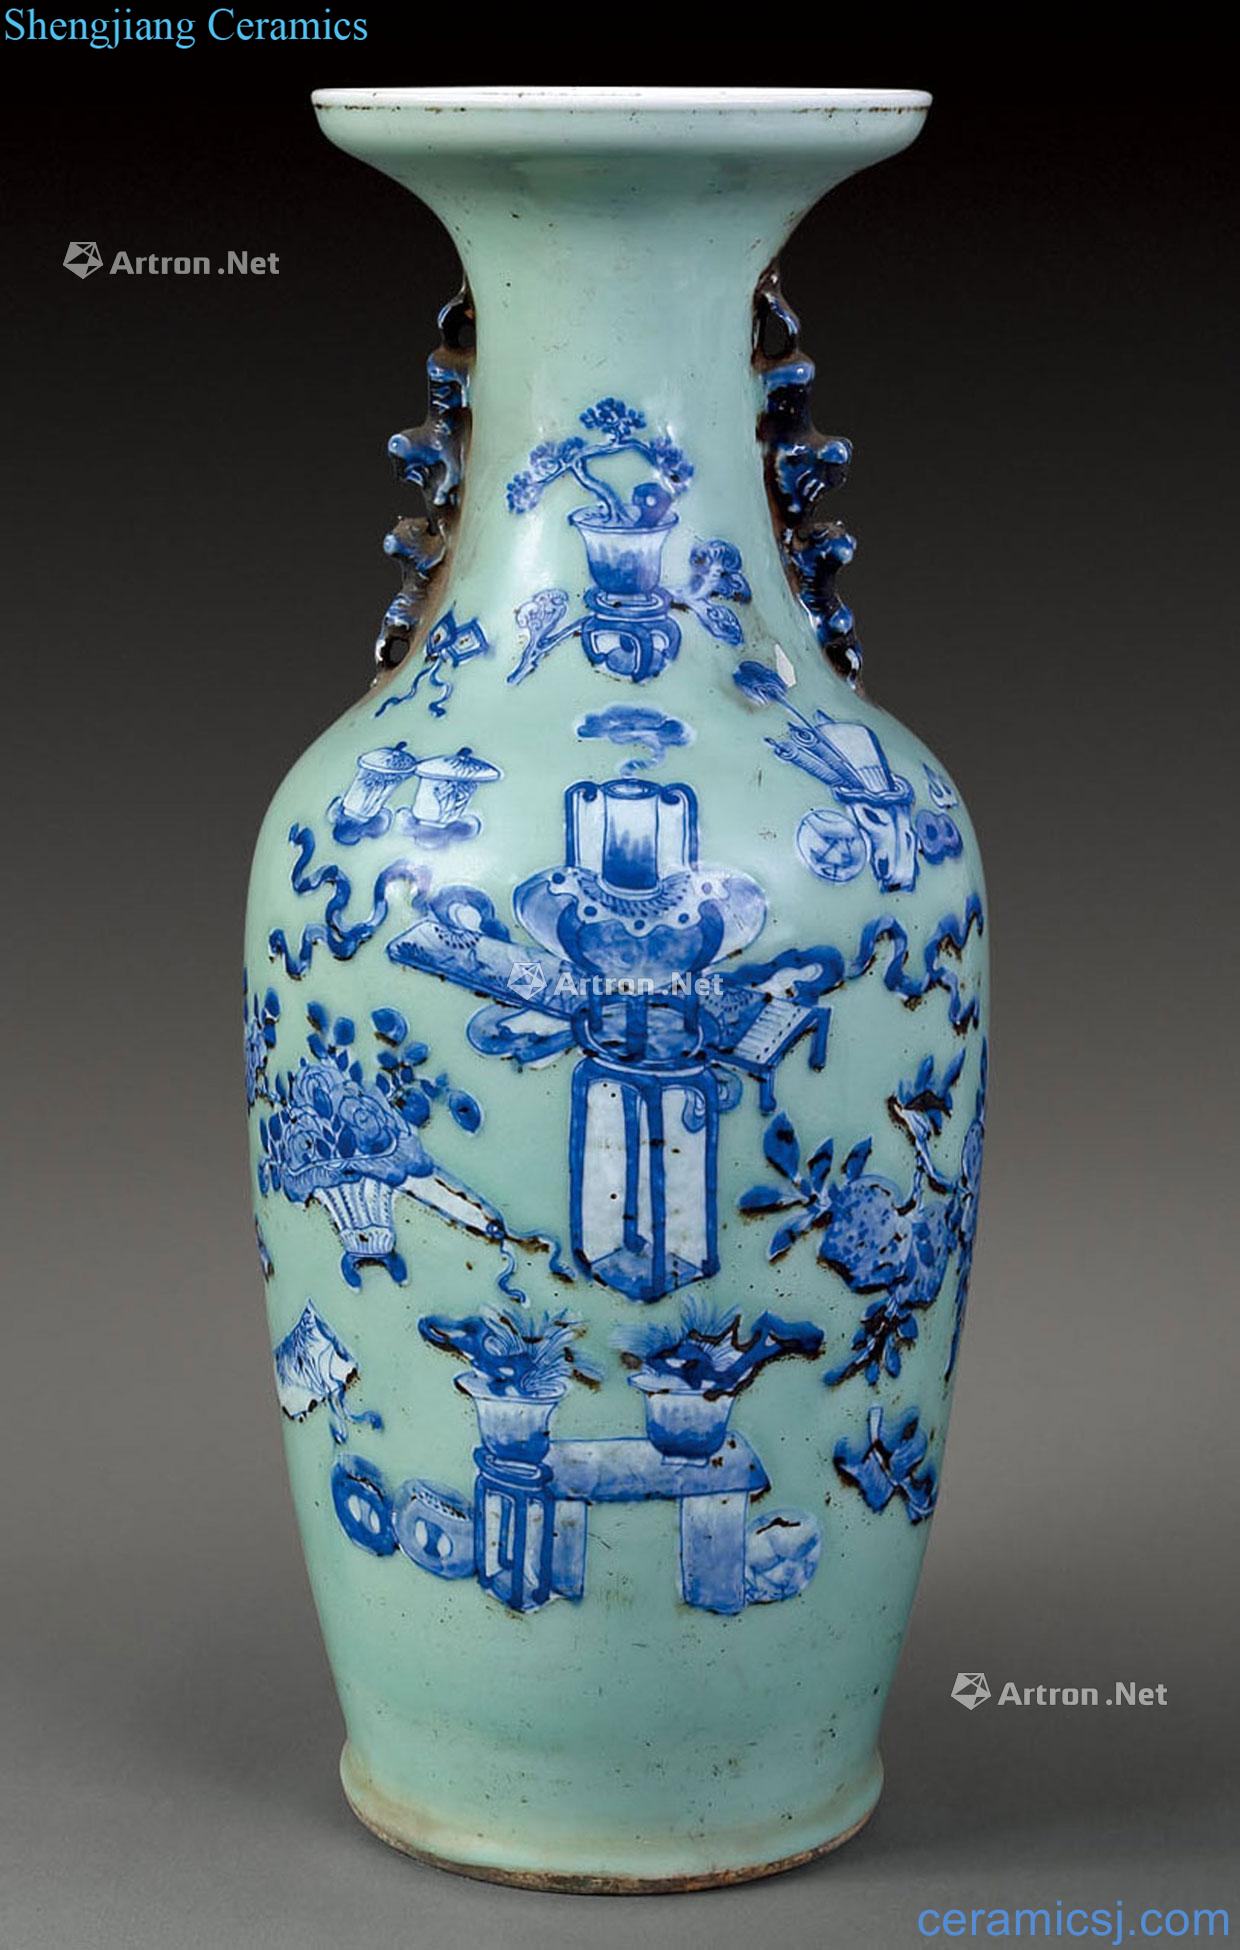 dajing Pea green blue and white flower vase with a double lion